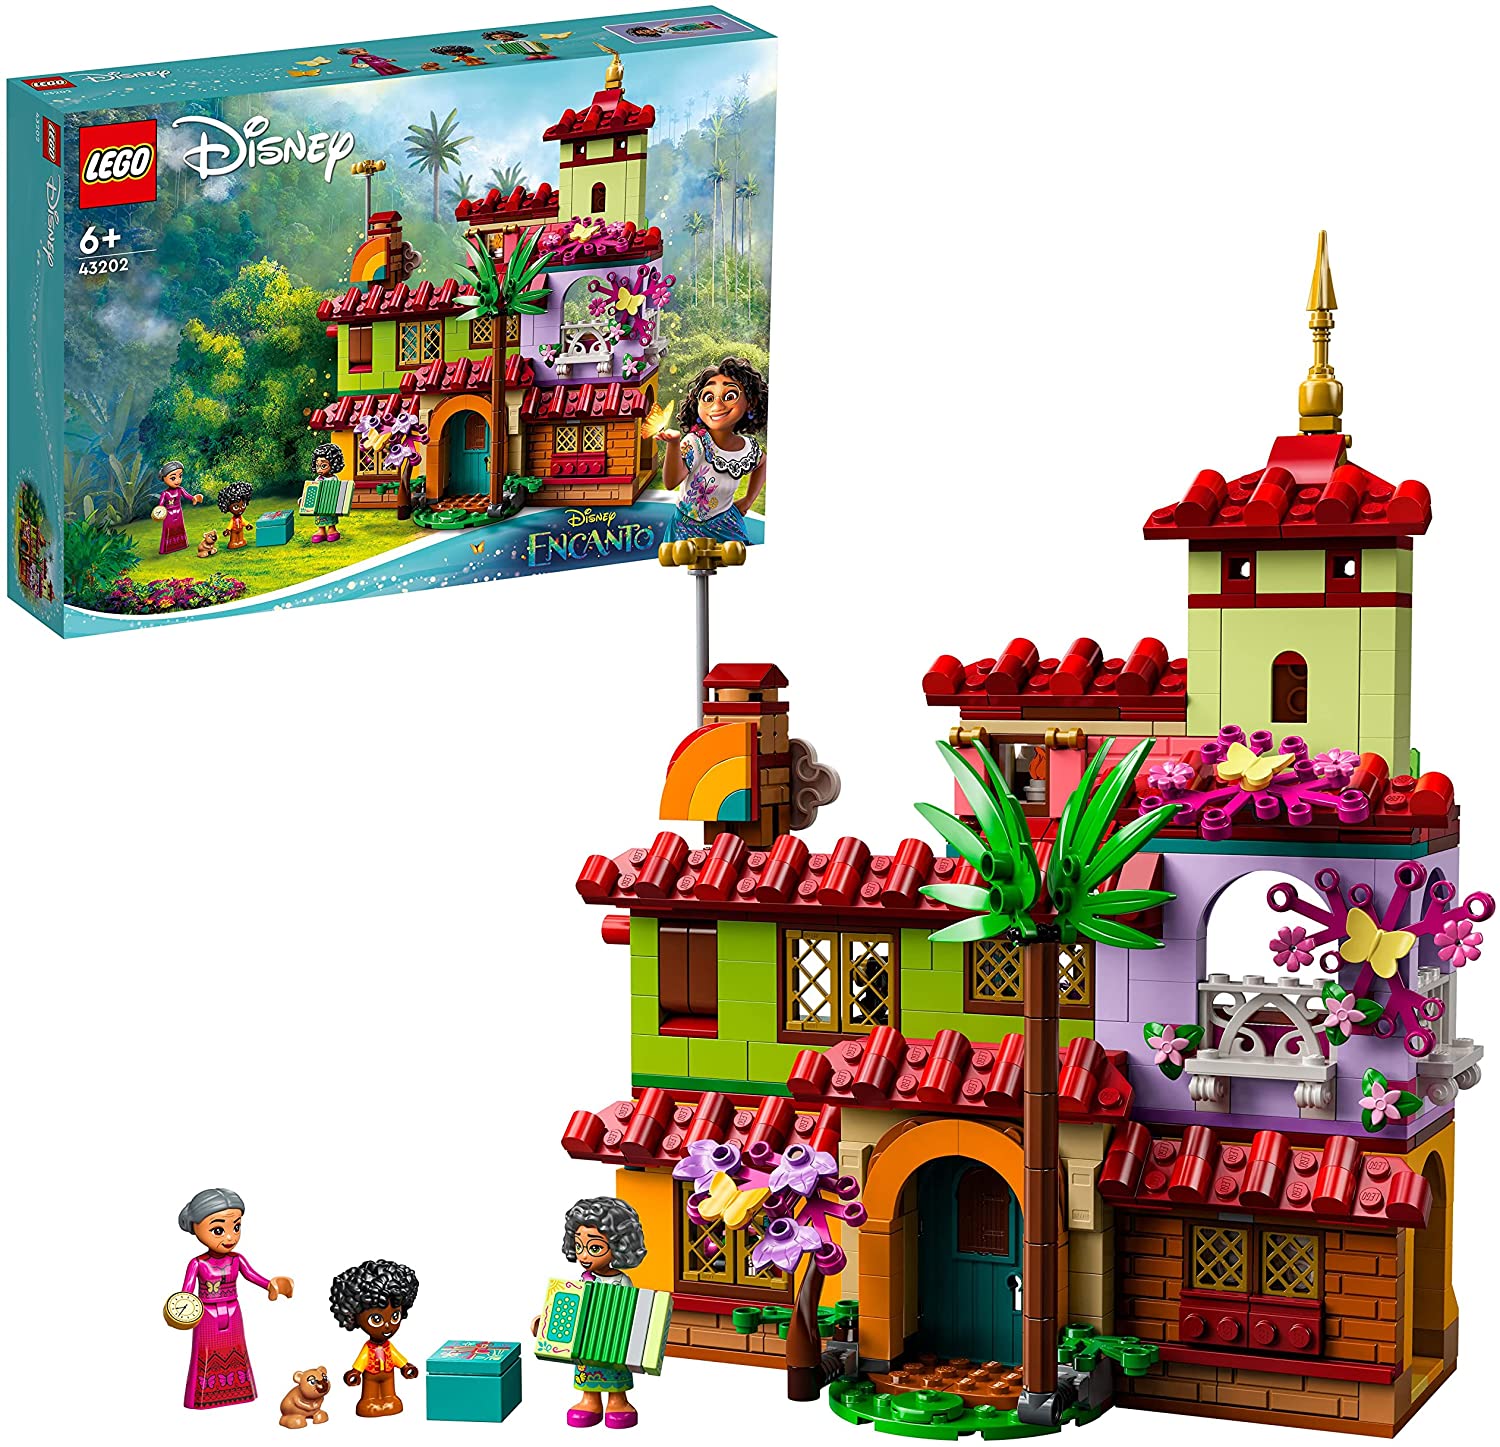 LEGO 43202 Disney Princess The House of the Madrigals Building Toy Dollhous